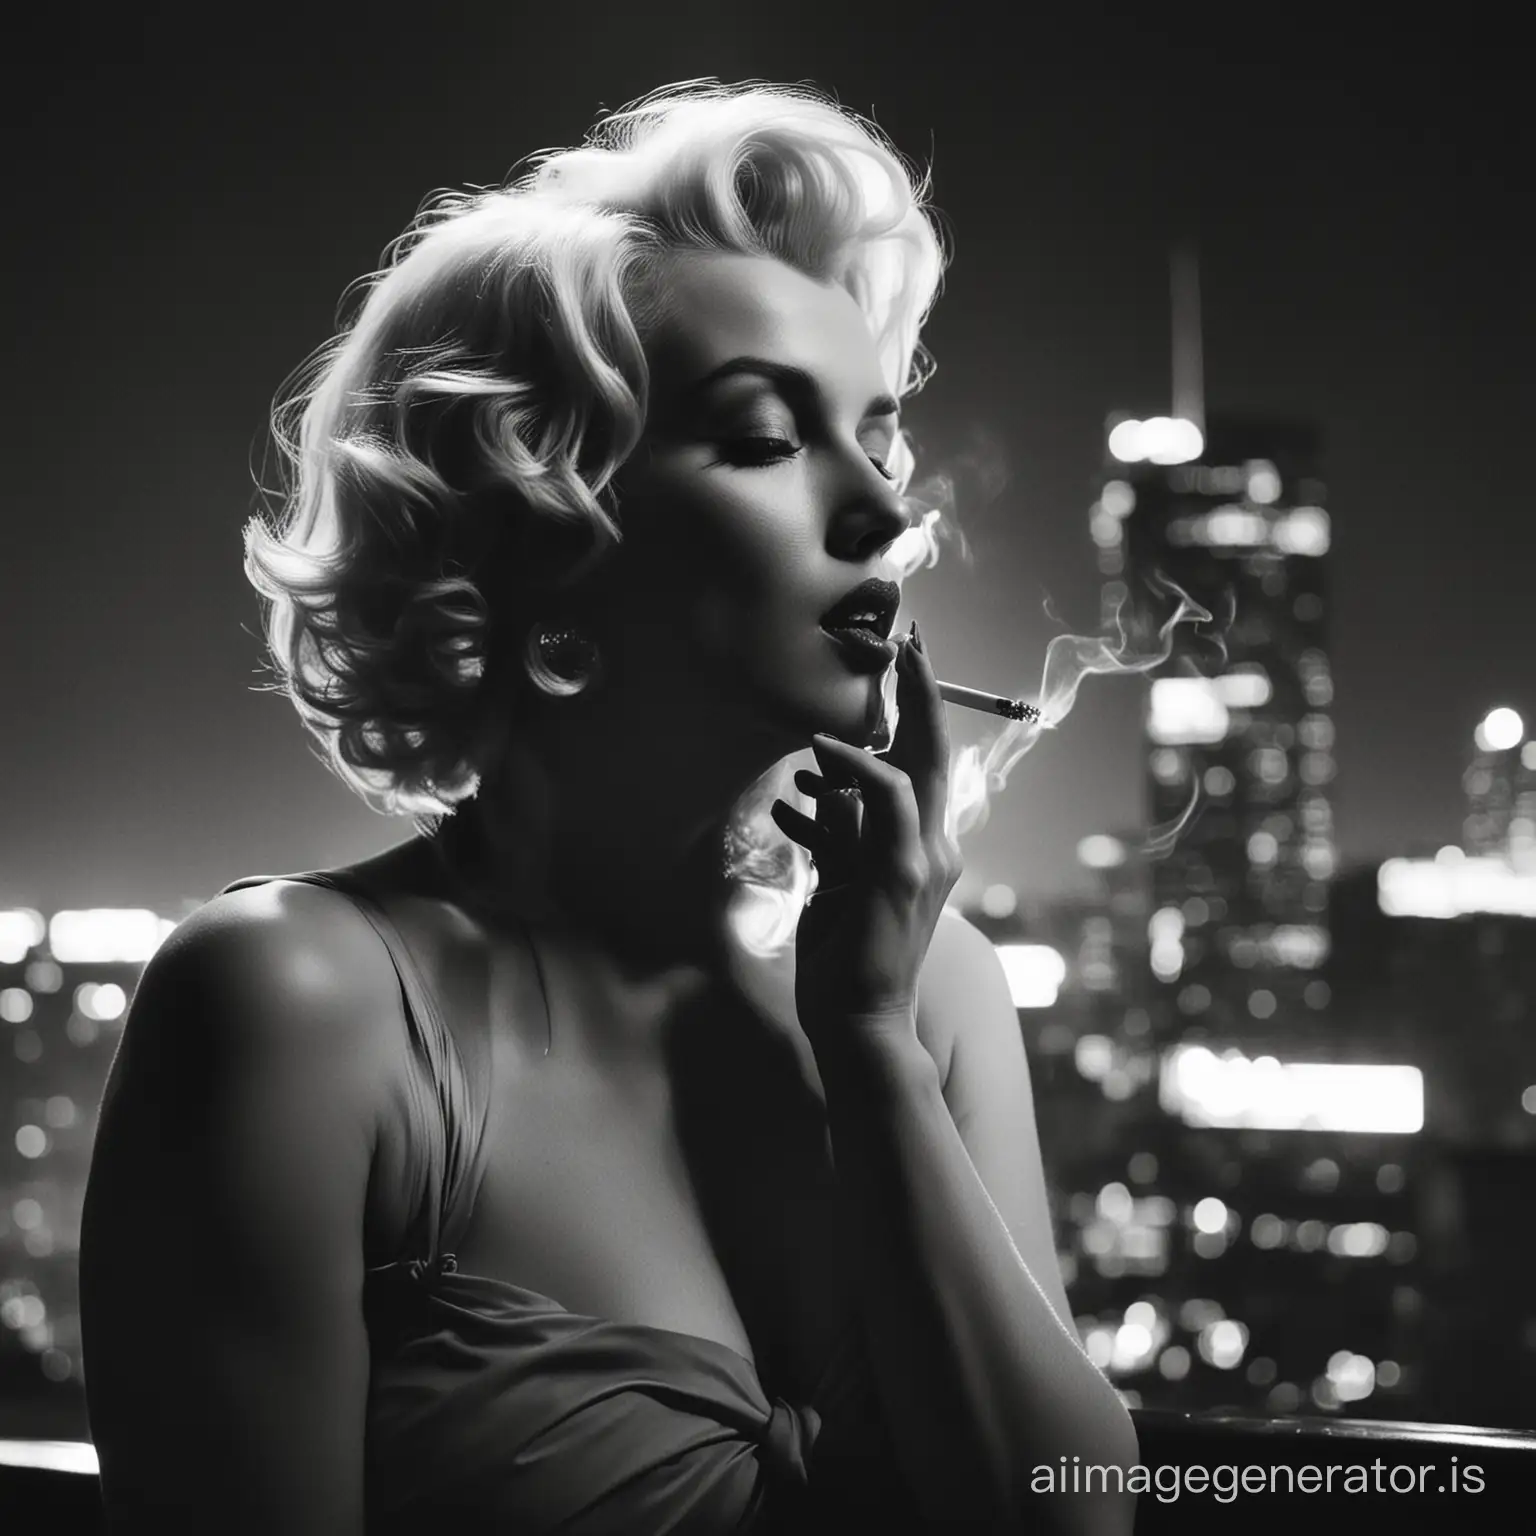 An image of Marilyn smoking against a backdrop of city lights at night, evoking a sense of urban noir and capturing the allure of both the city and the celebrity.